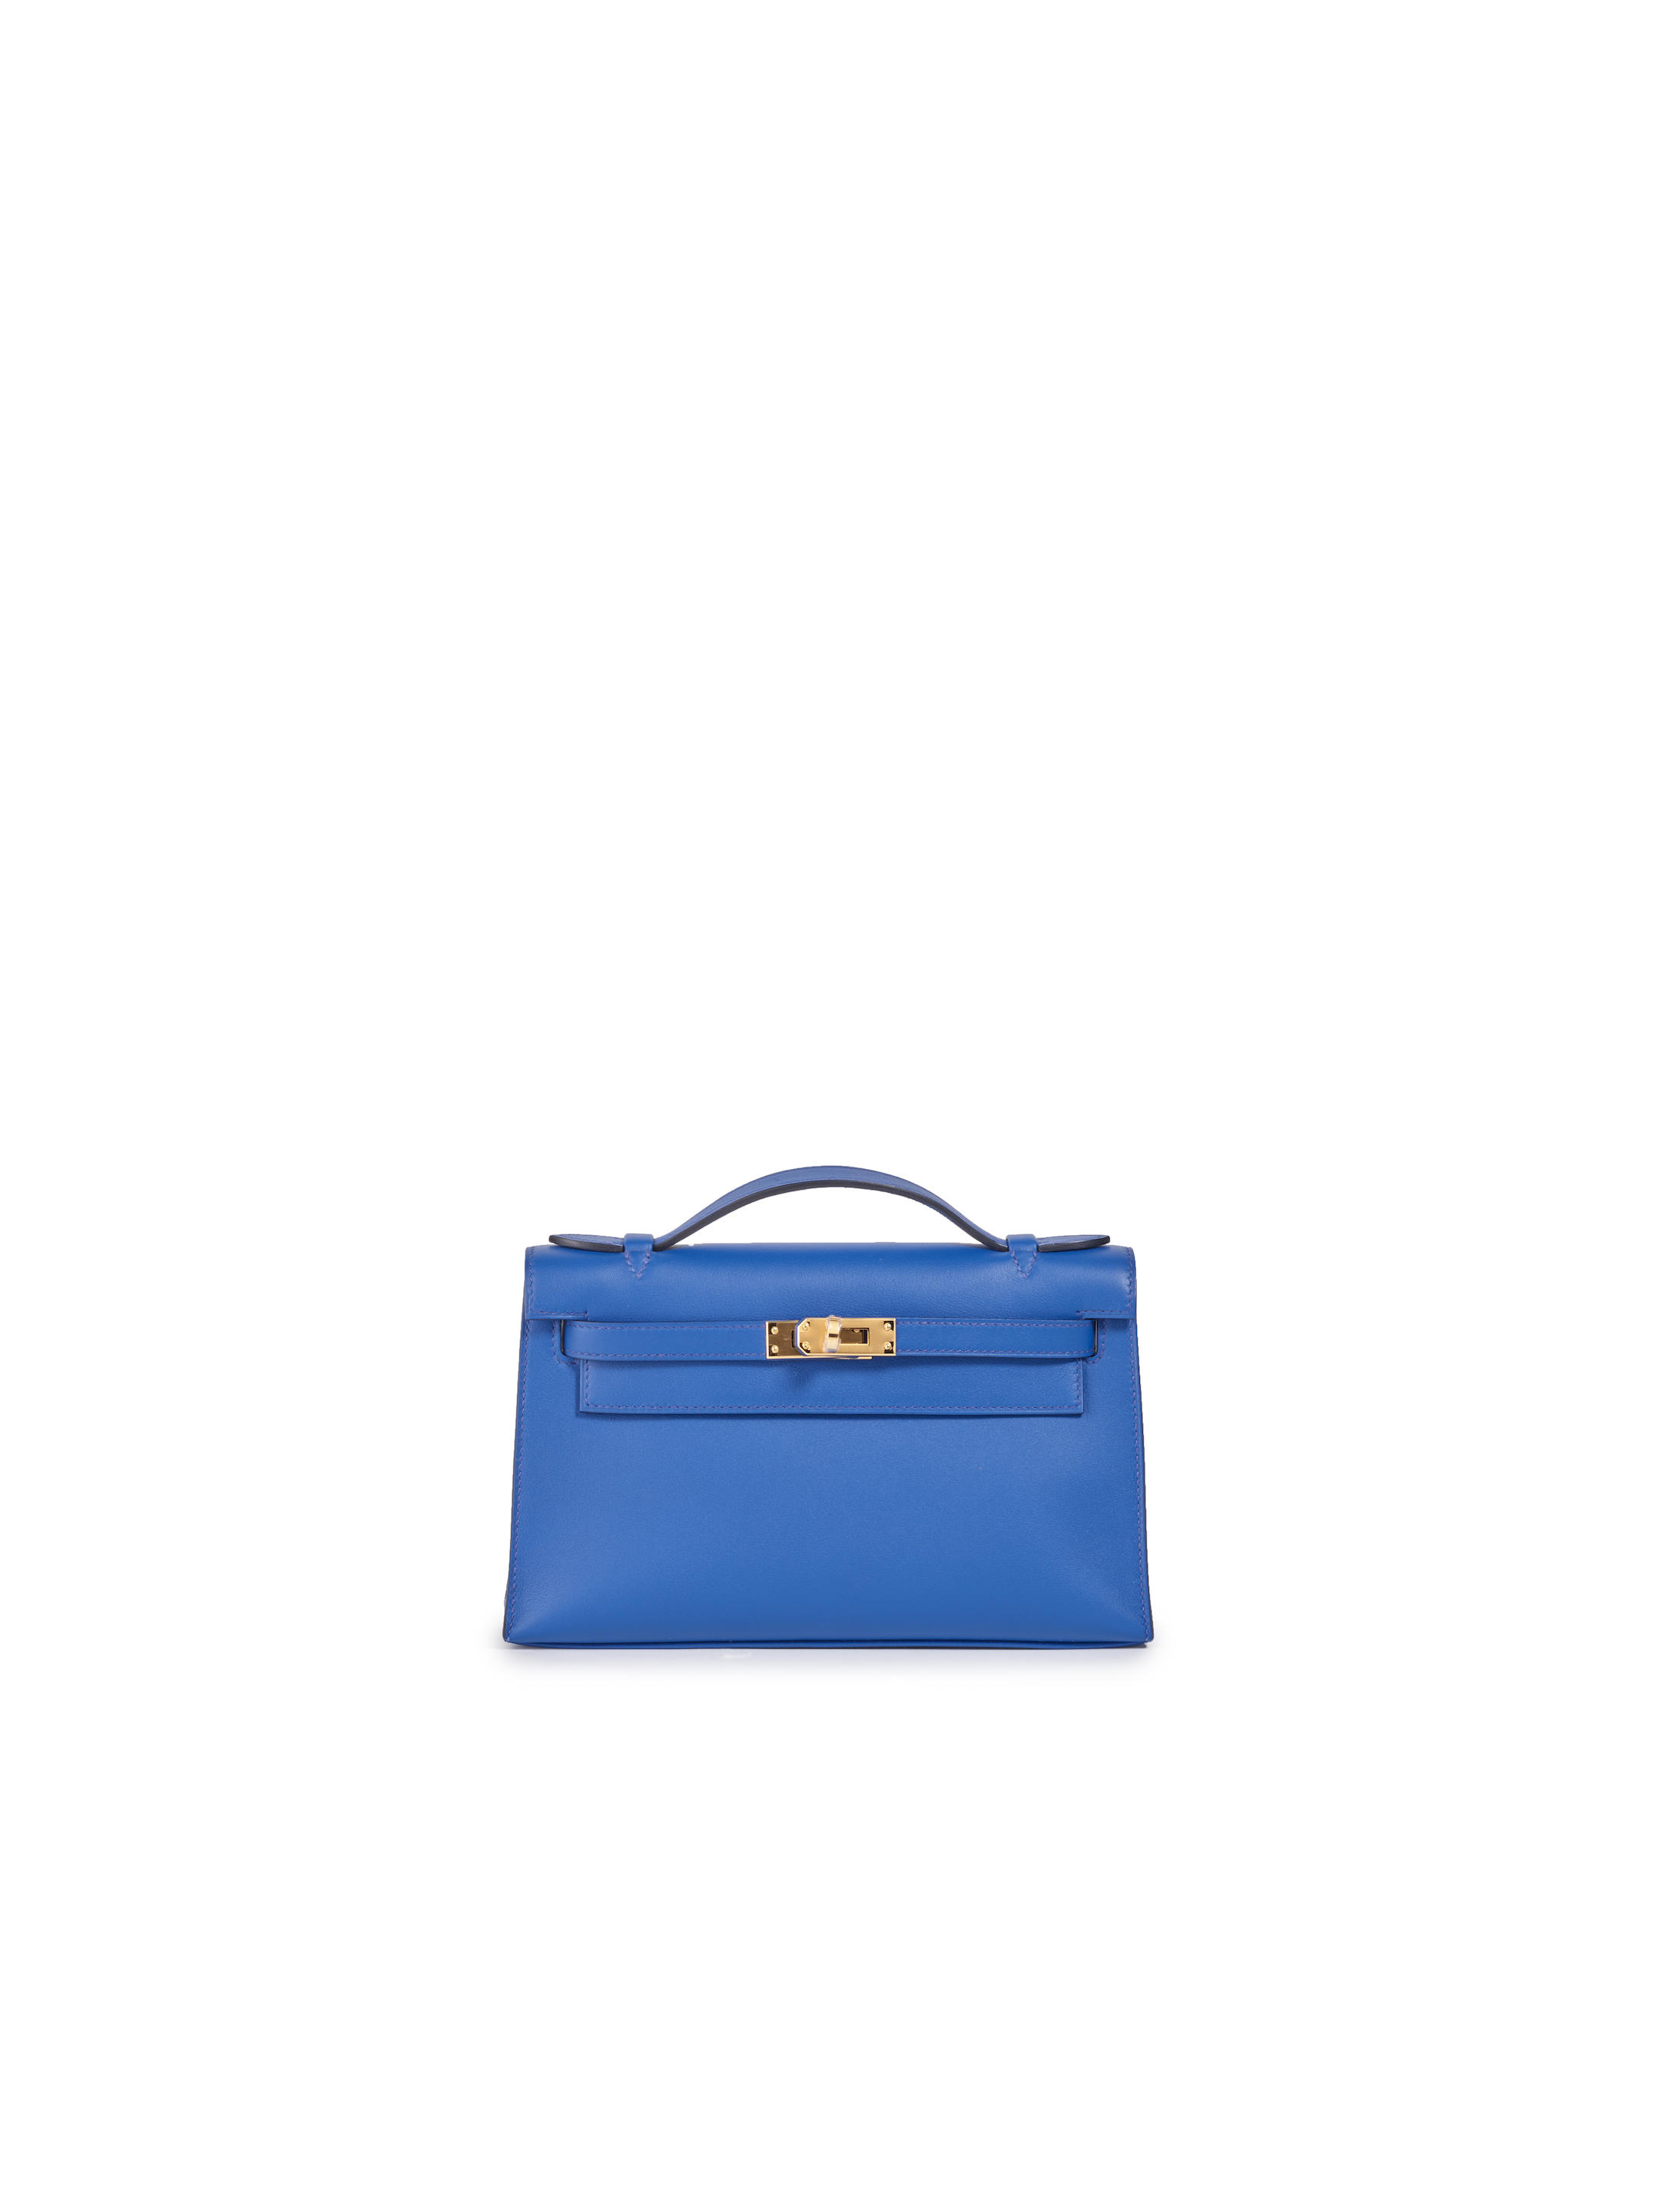 Is this a real or fake $20,000 Hermes Kelly Pochette Handbag? 